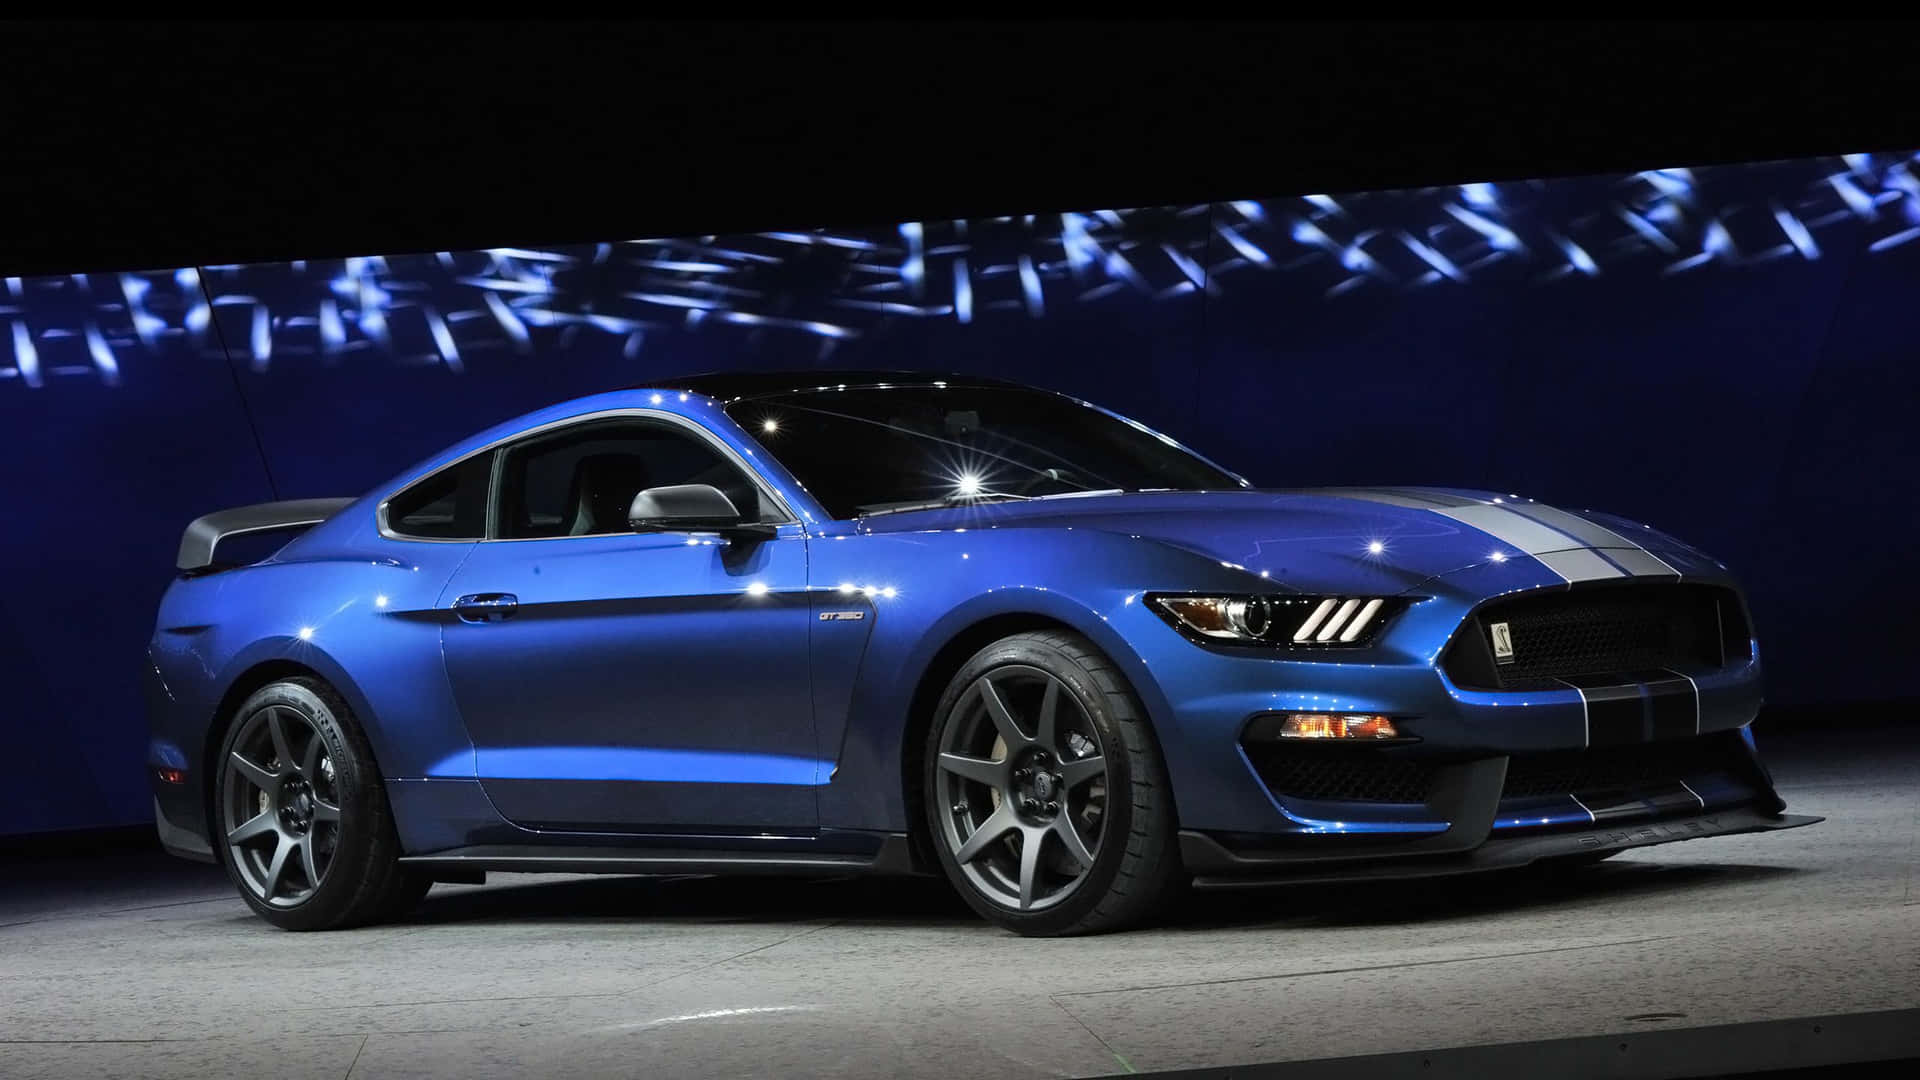 Stunning Ford Mustang Shelby GT350 in full speed Wallpaper